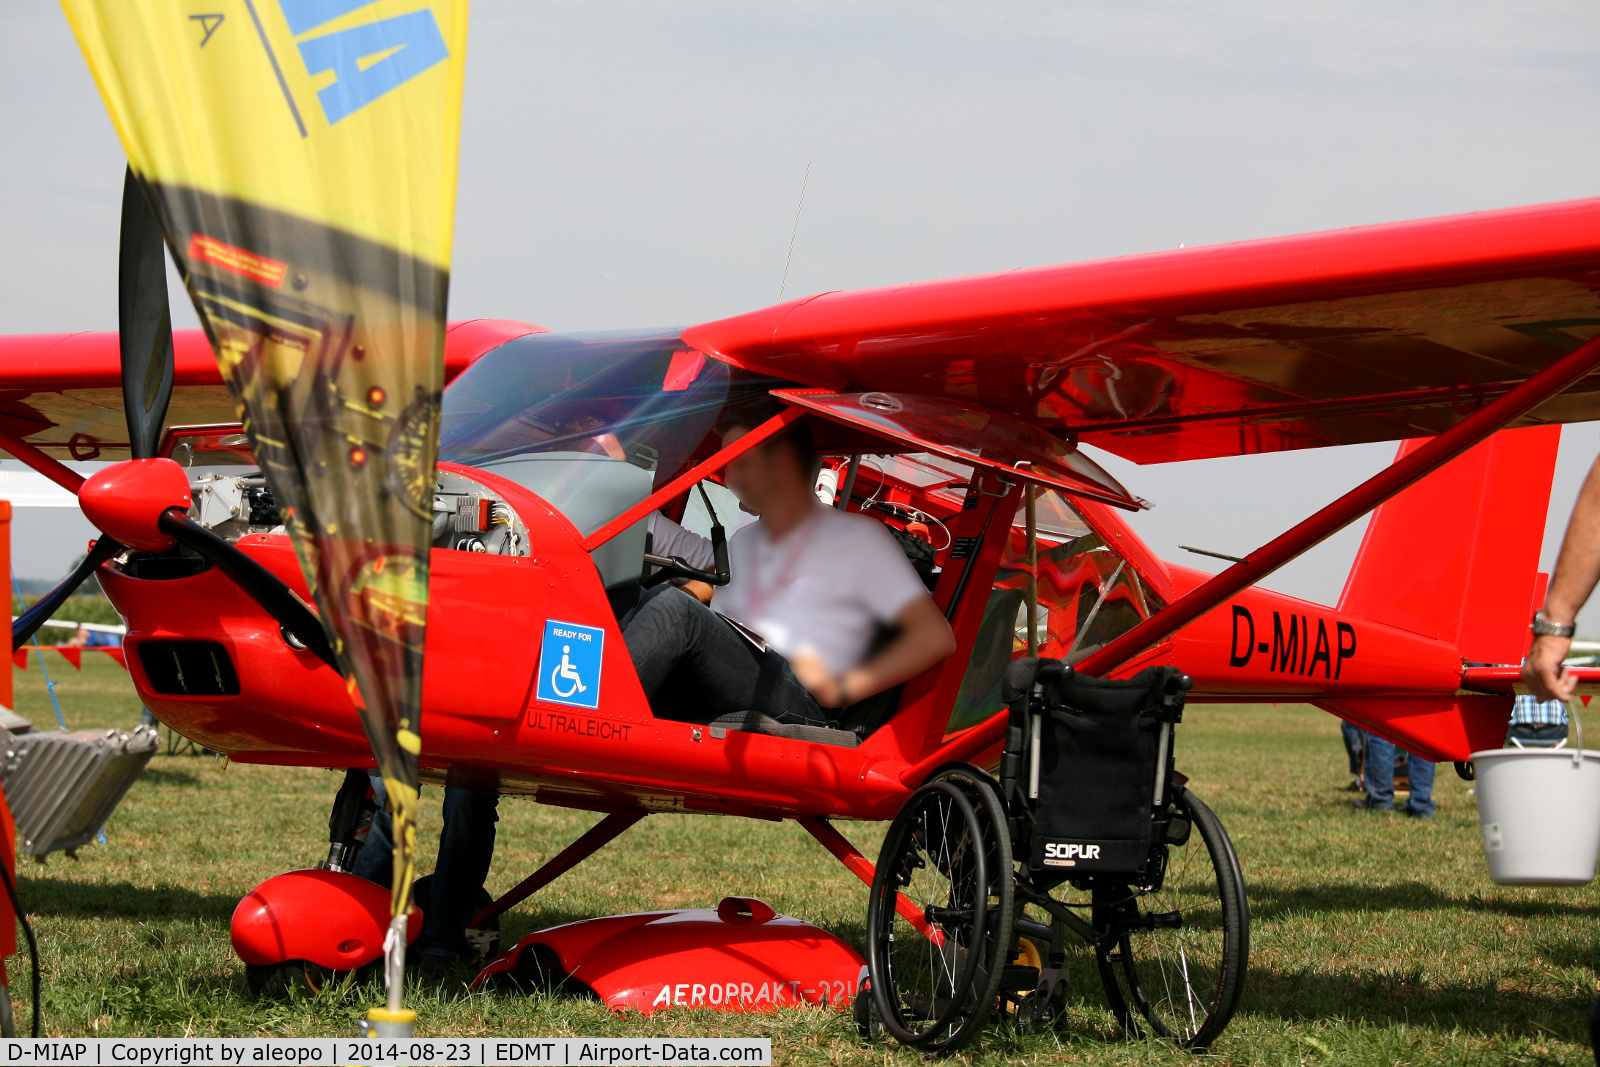 D-MIAP, 2013 Aeroprakt A-22L2 Foxbat C/N 432, Tannkosh 2013 - the aircraft can be controlled by disabled pilots